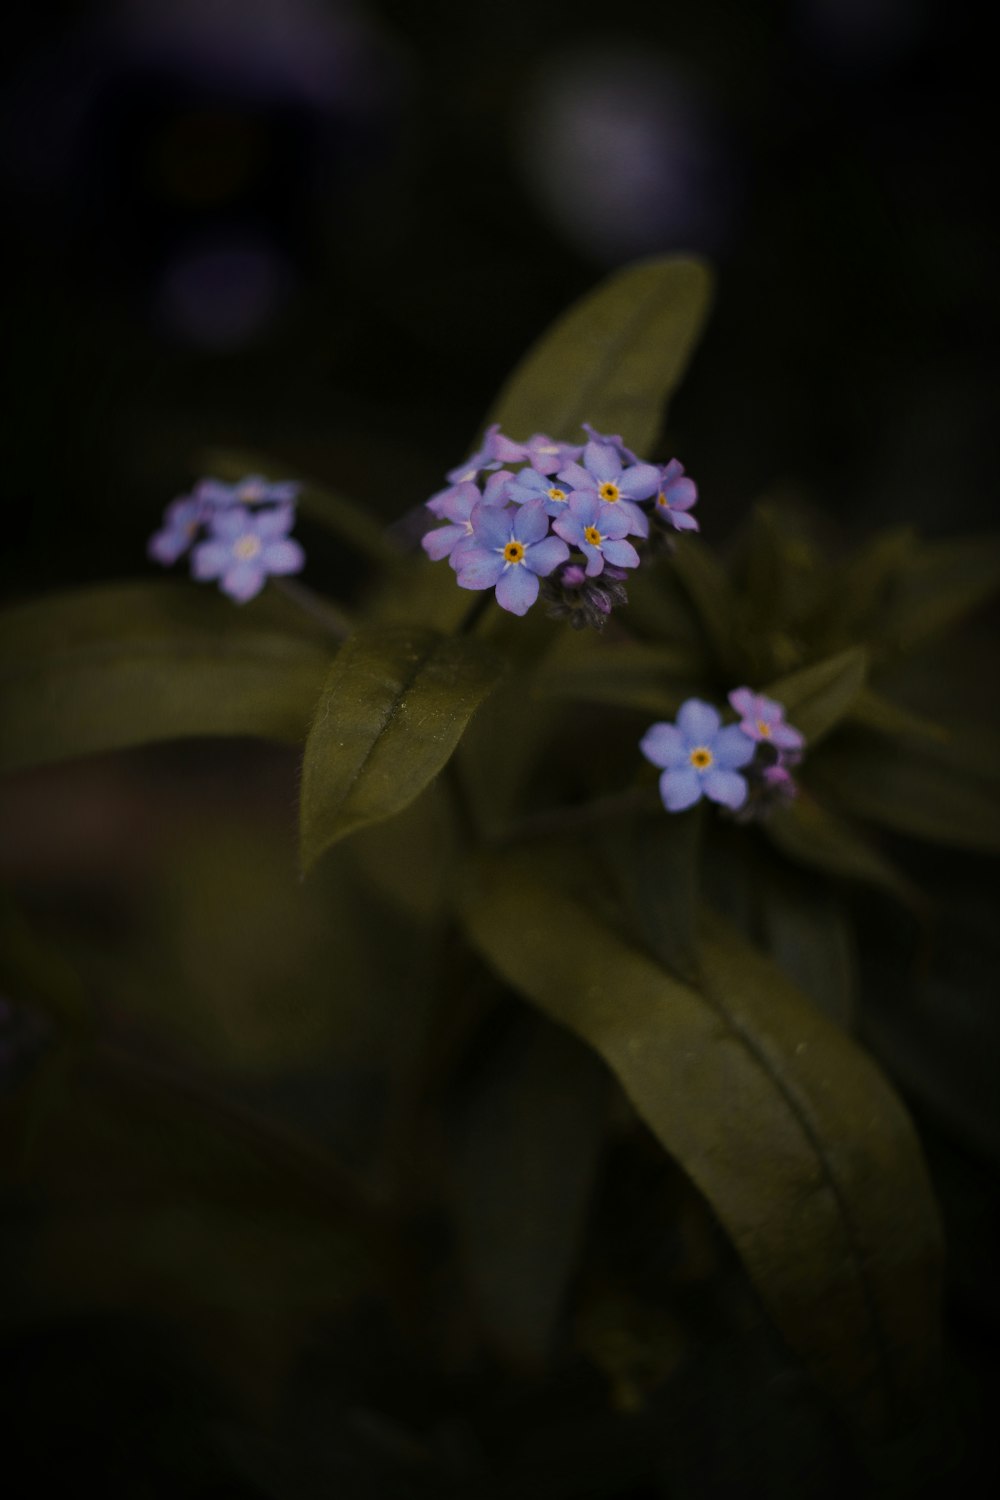 small purple flowers with green leaves on a dark background